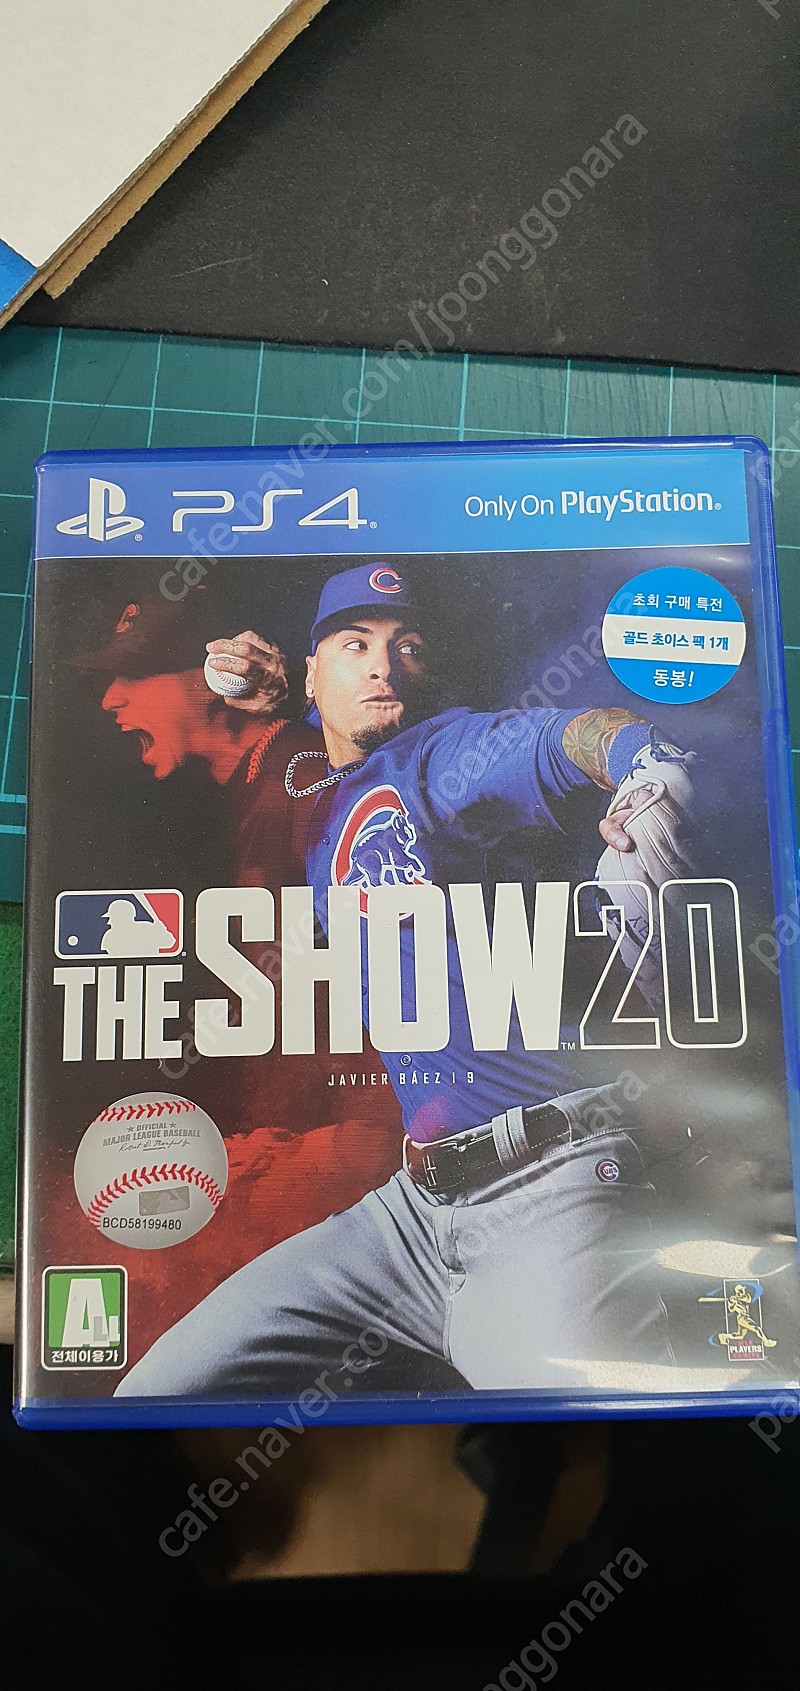 Ps4 the show20 팝니다